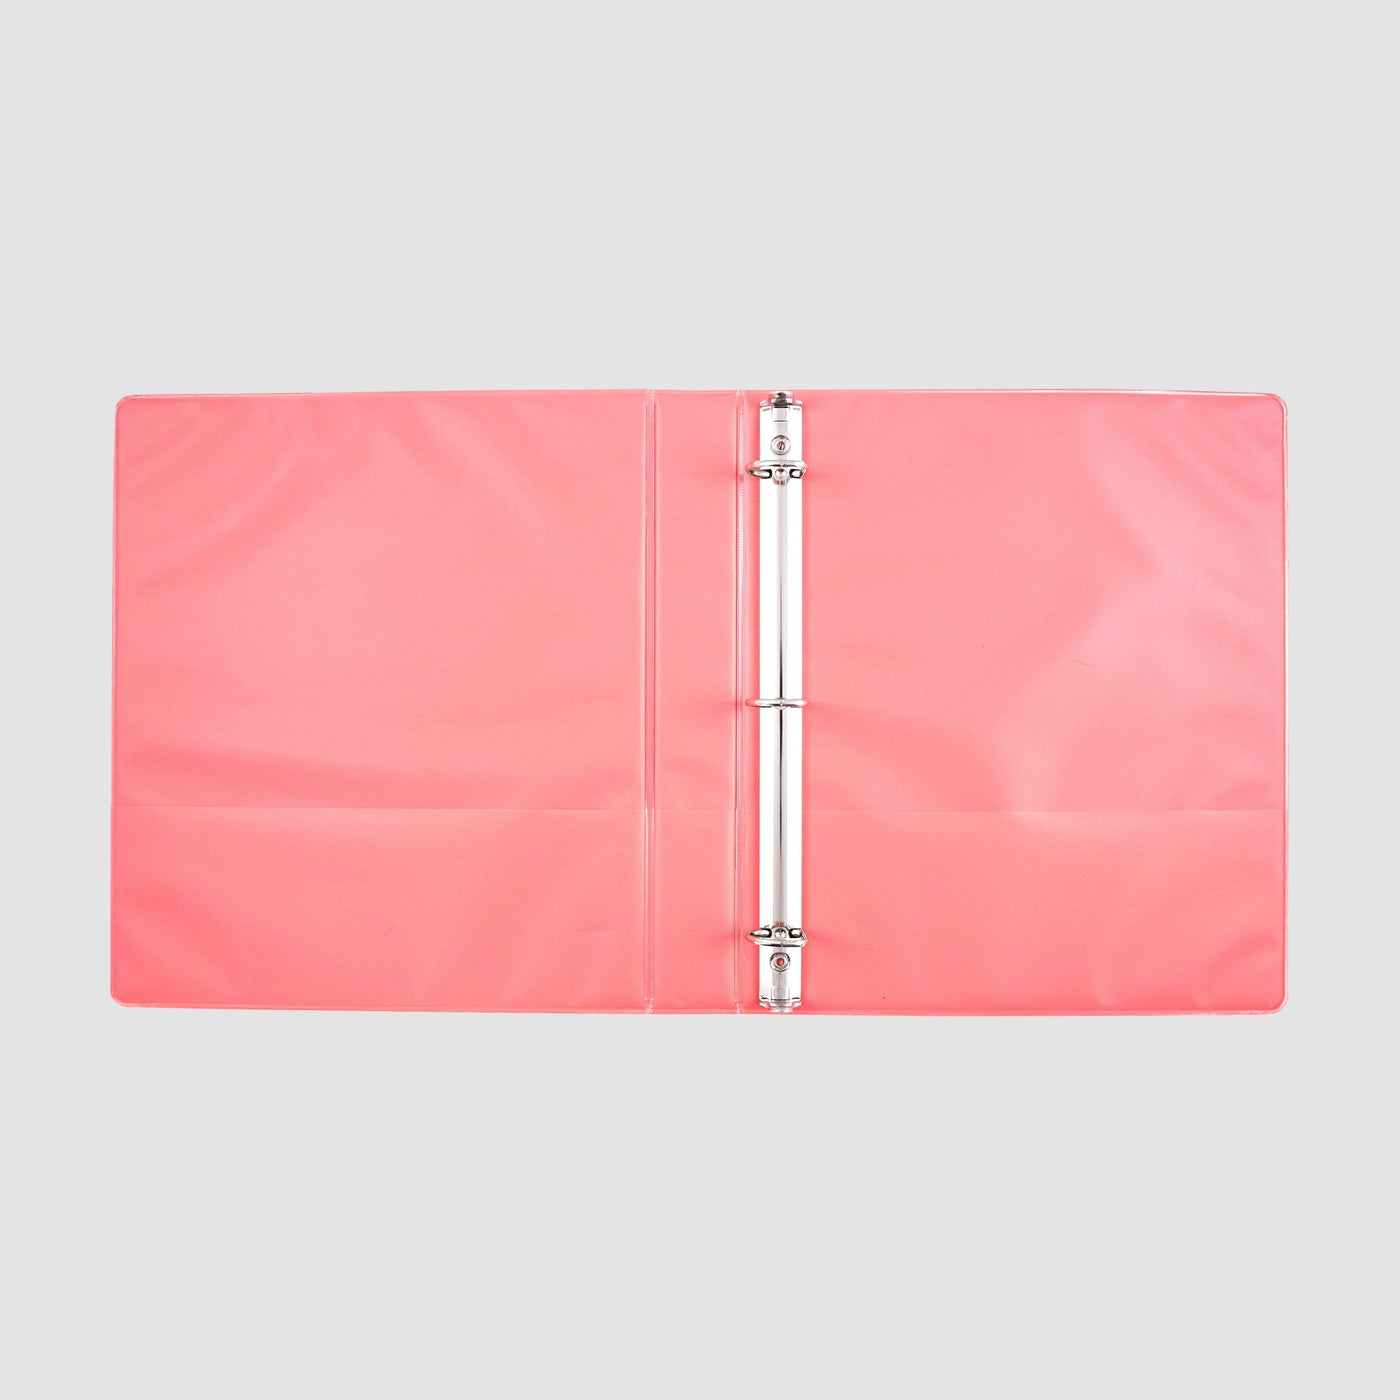 inside of open coral ombre 3-ring 1" binder showing inside pockets on both sides and D-ring detail